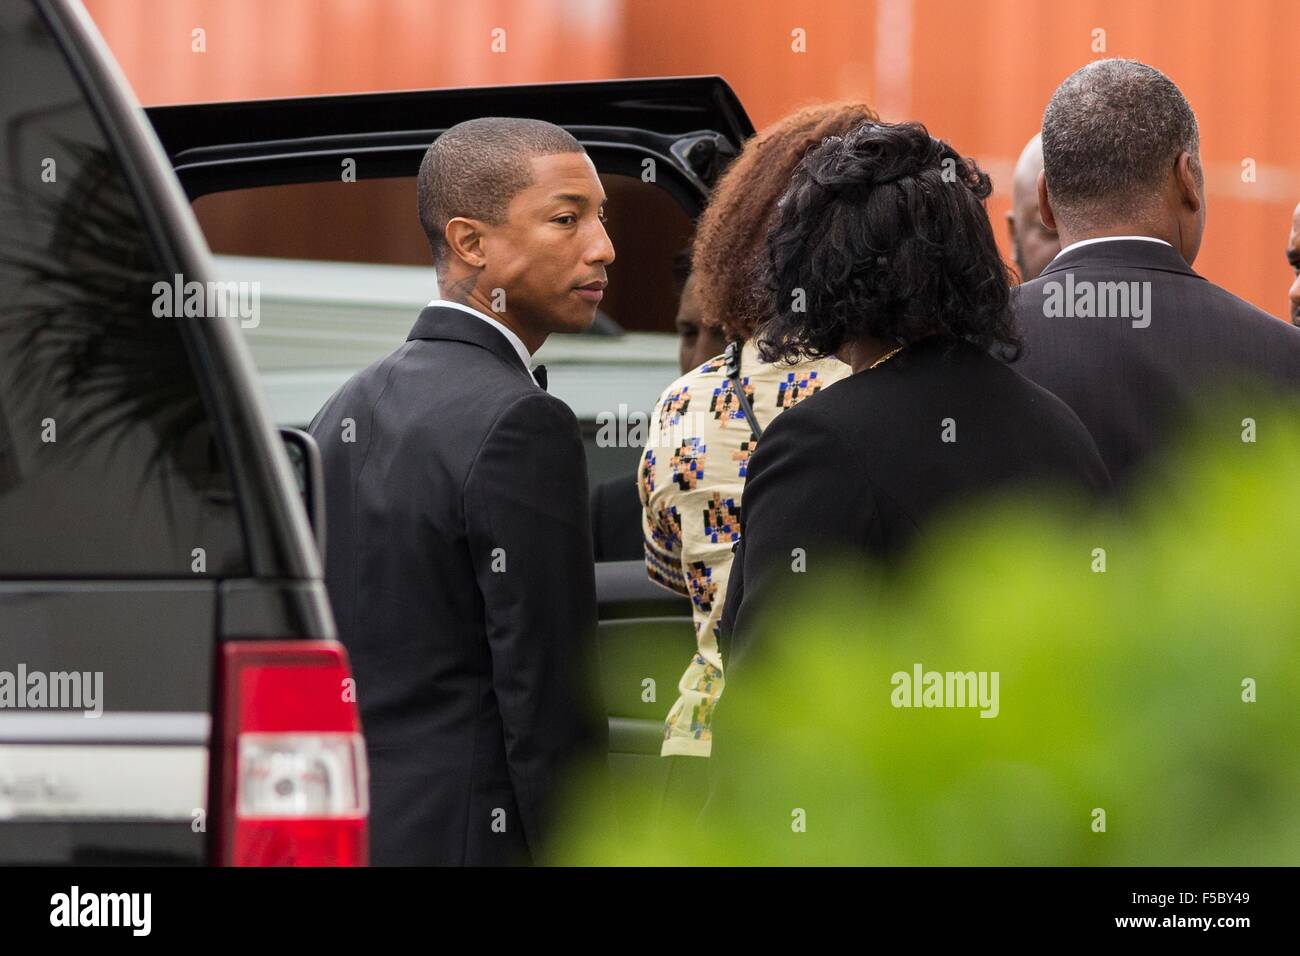 Superstar Pharrell Williams thanks family members of the Charleston 9 shooting outside the historic Mother Emanuel AME Church after performing with the Gospel Choir during Sunday service November 1, 2015 in Charleston, South Carolina. The church was the site of the mass shooting that killed nine-people in June 2015 and will be featured as part of a program on race relations being produced by A+E Networks. Stock Photo